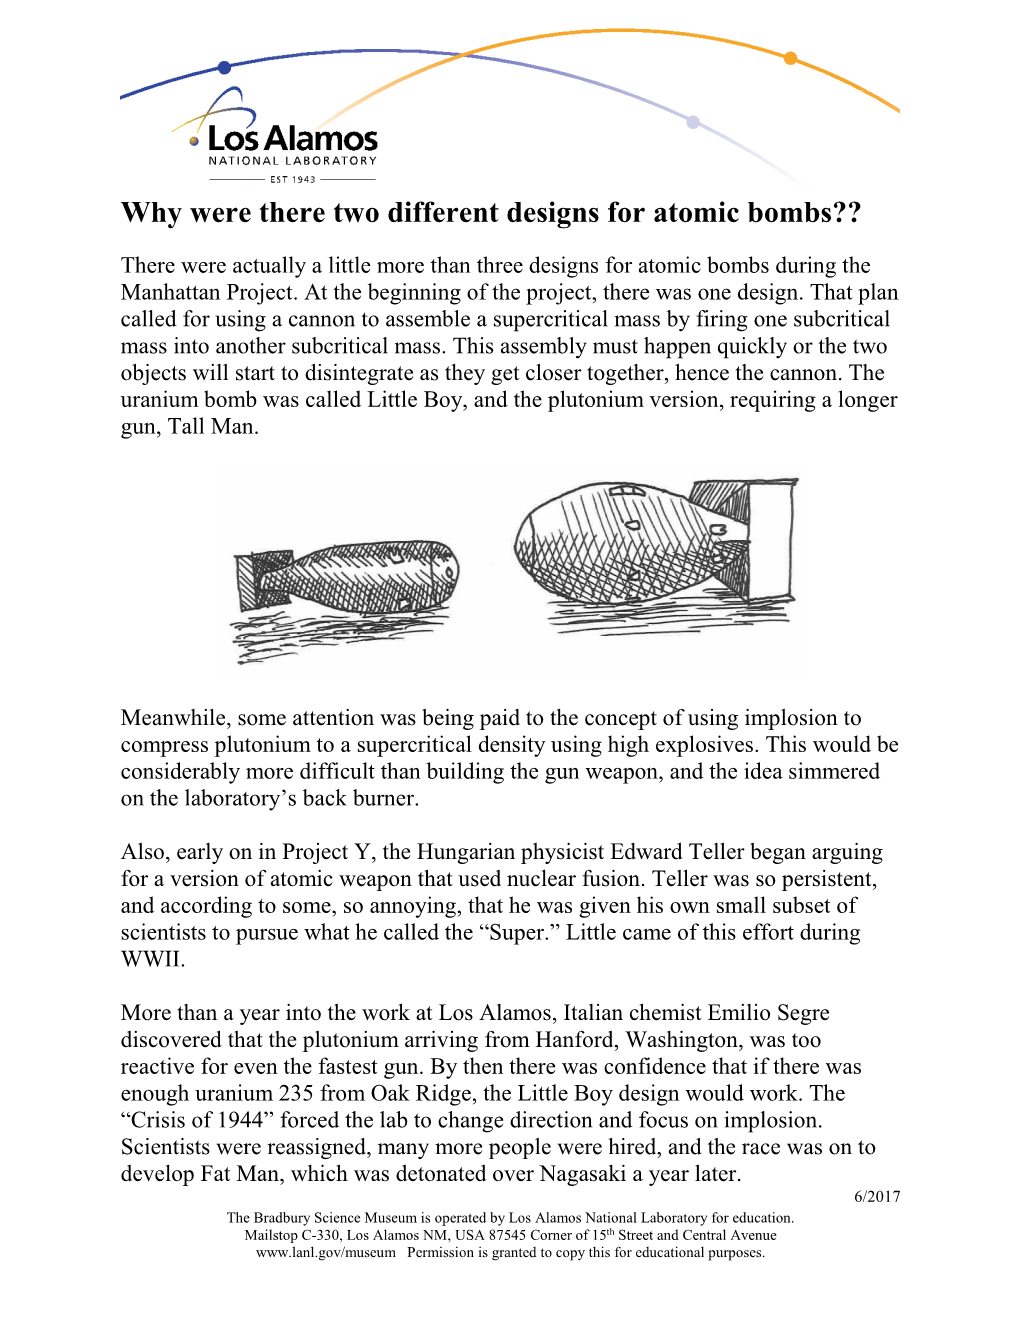 Why Were There Two Different Designs for Atomic Bombs??